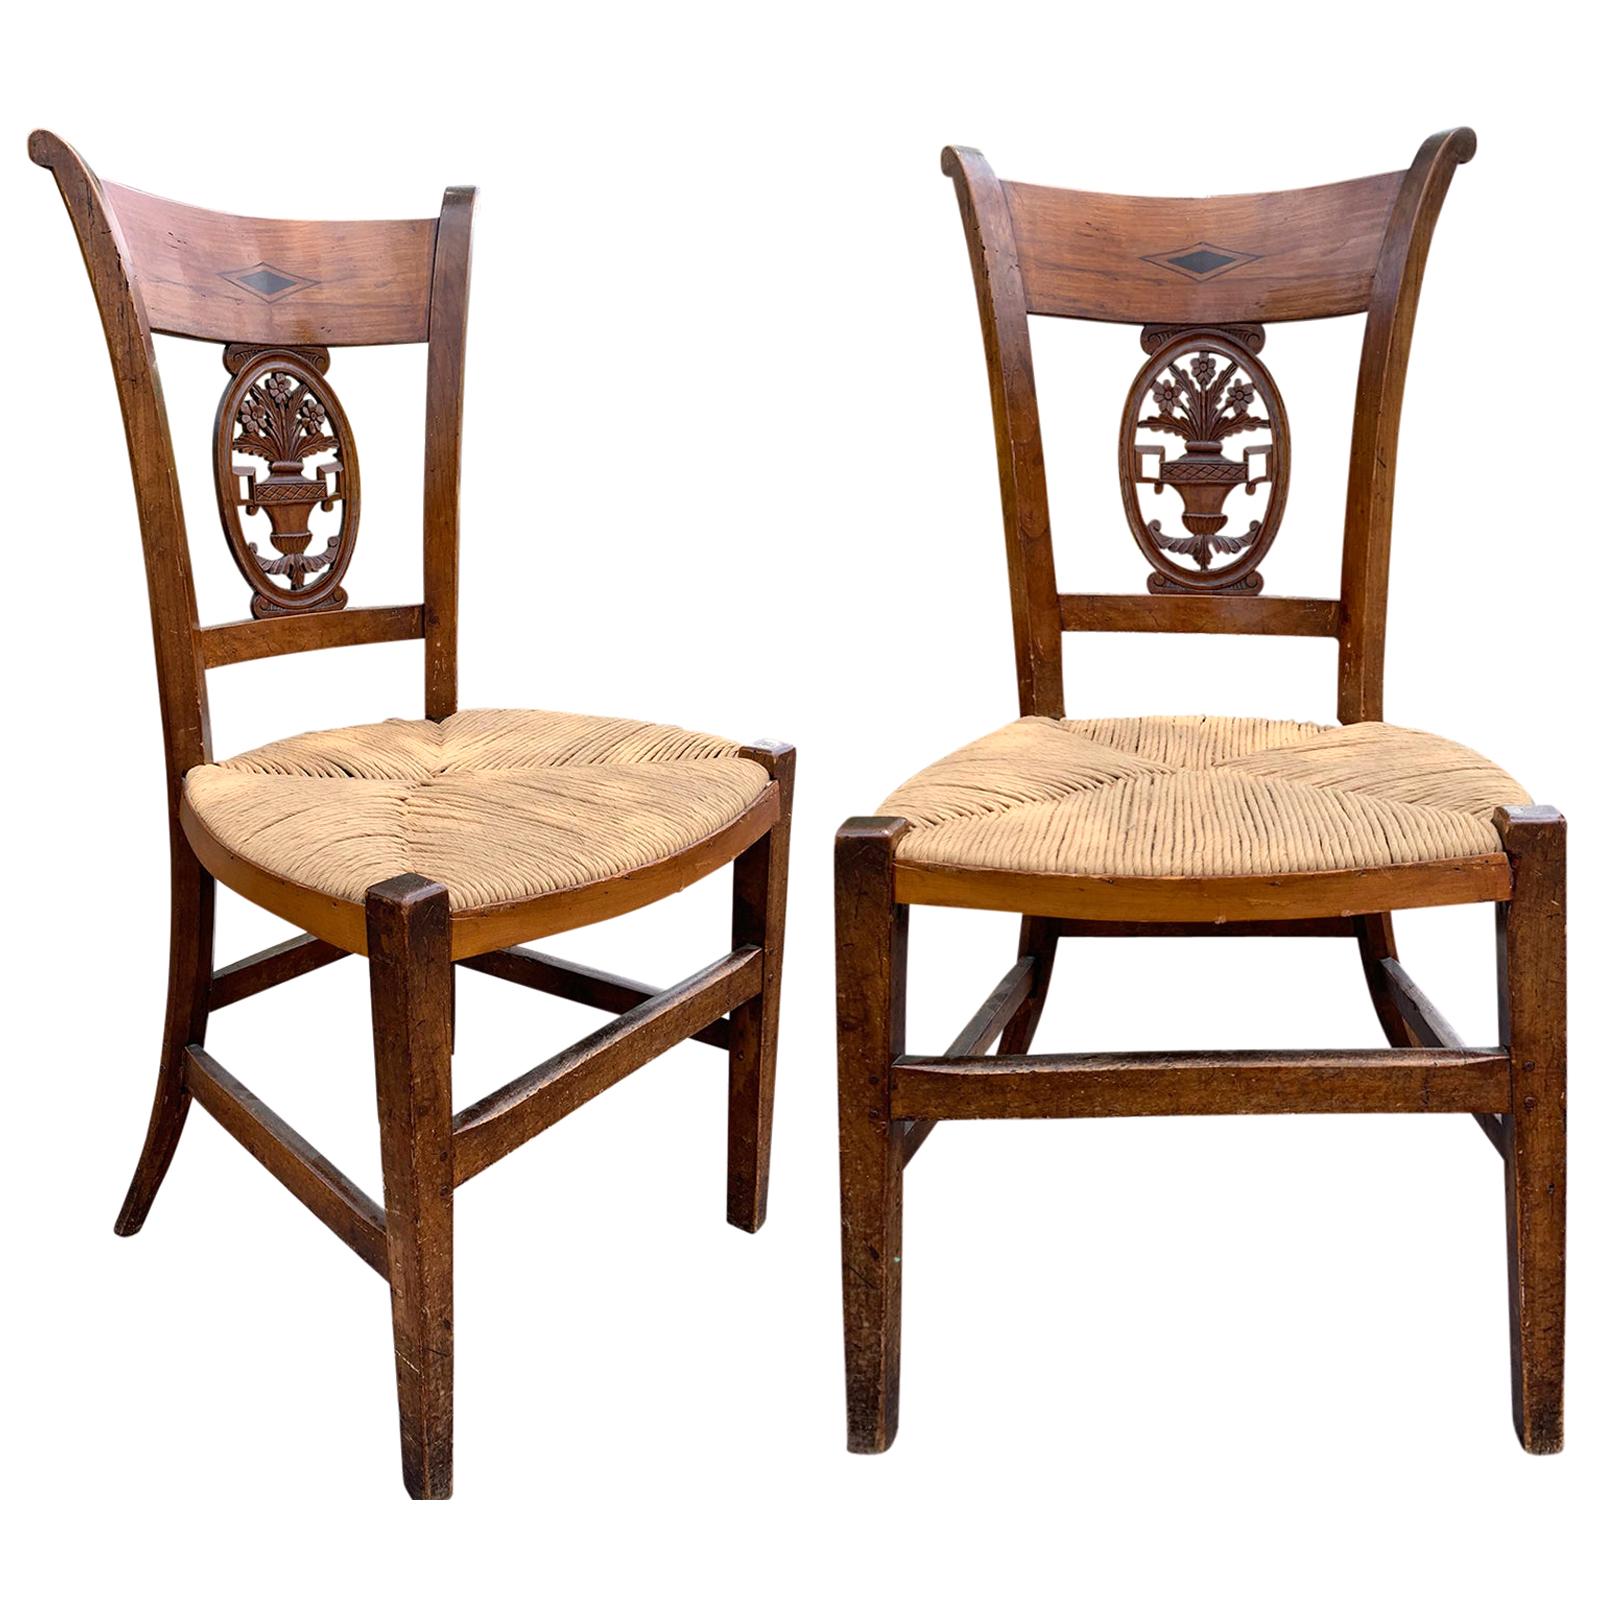 Pair of 19th-20th Century French Country Carved Side Chairs with Rush Seats